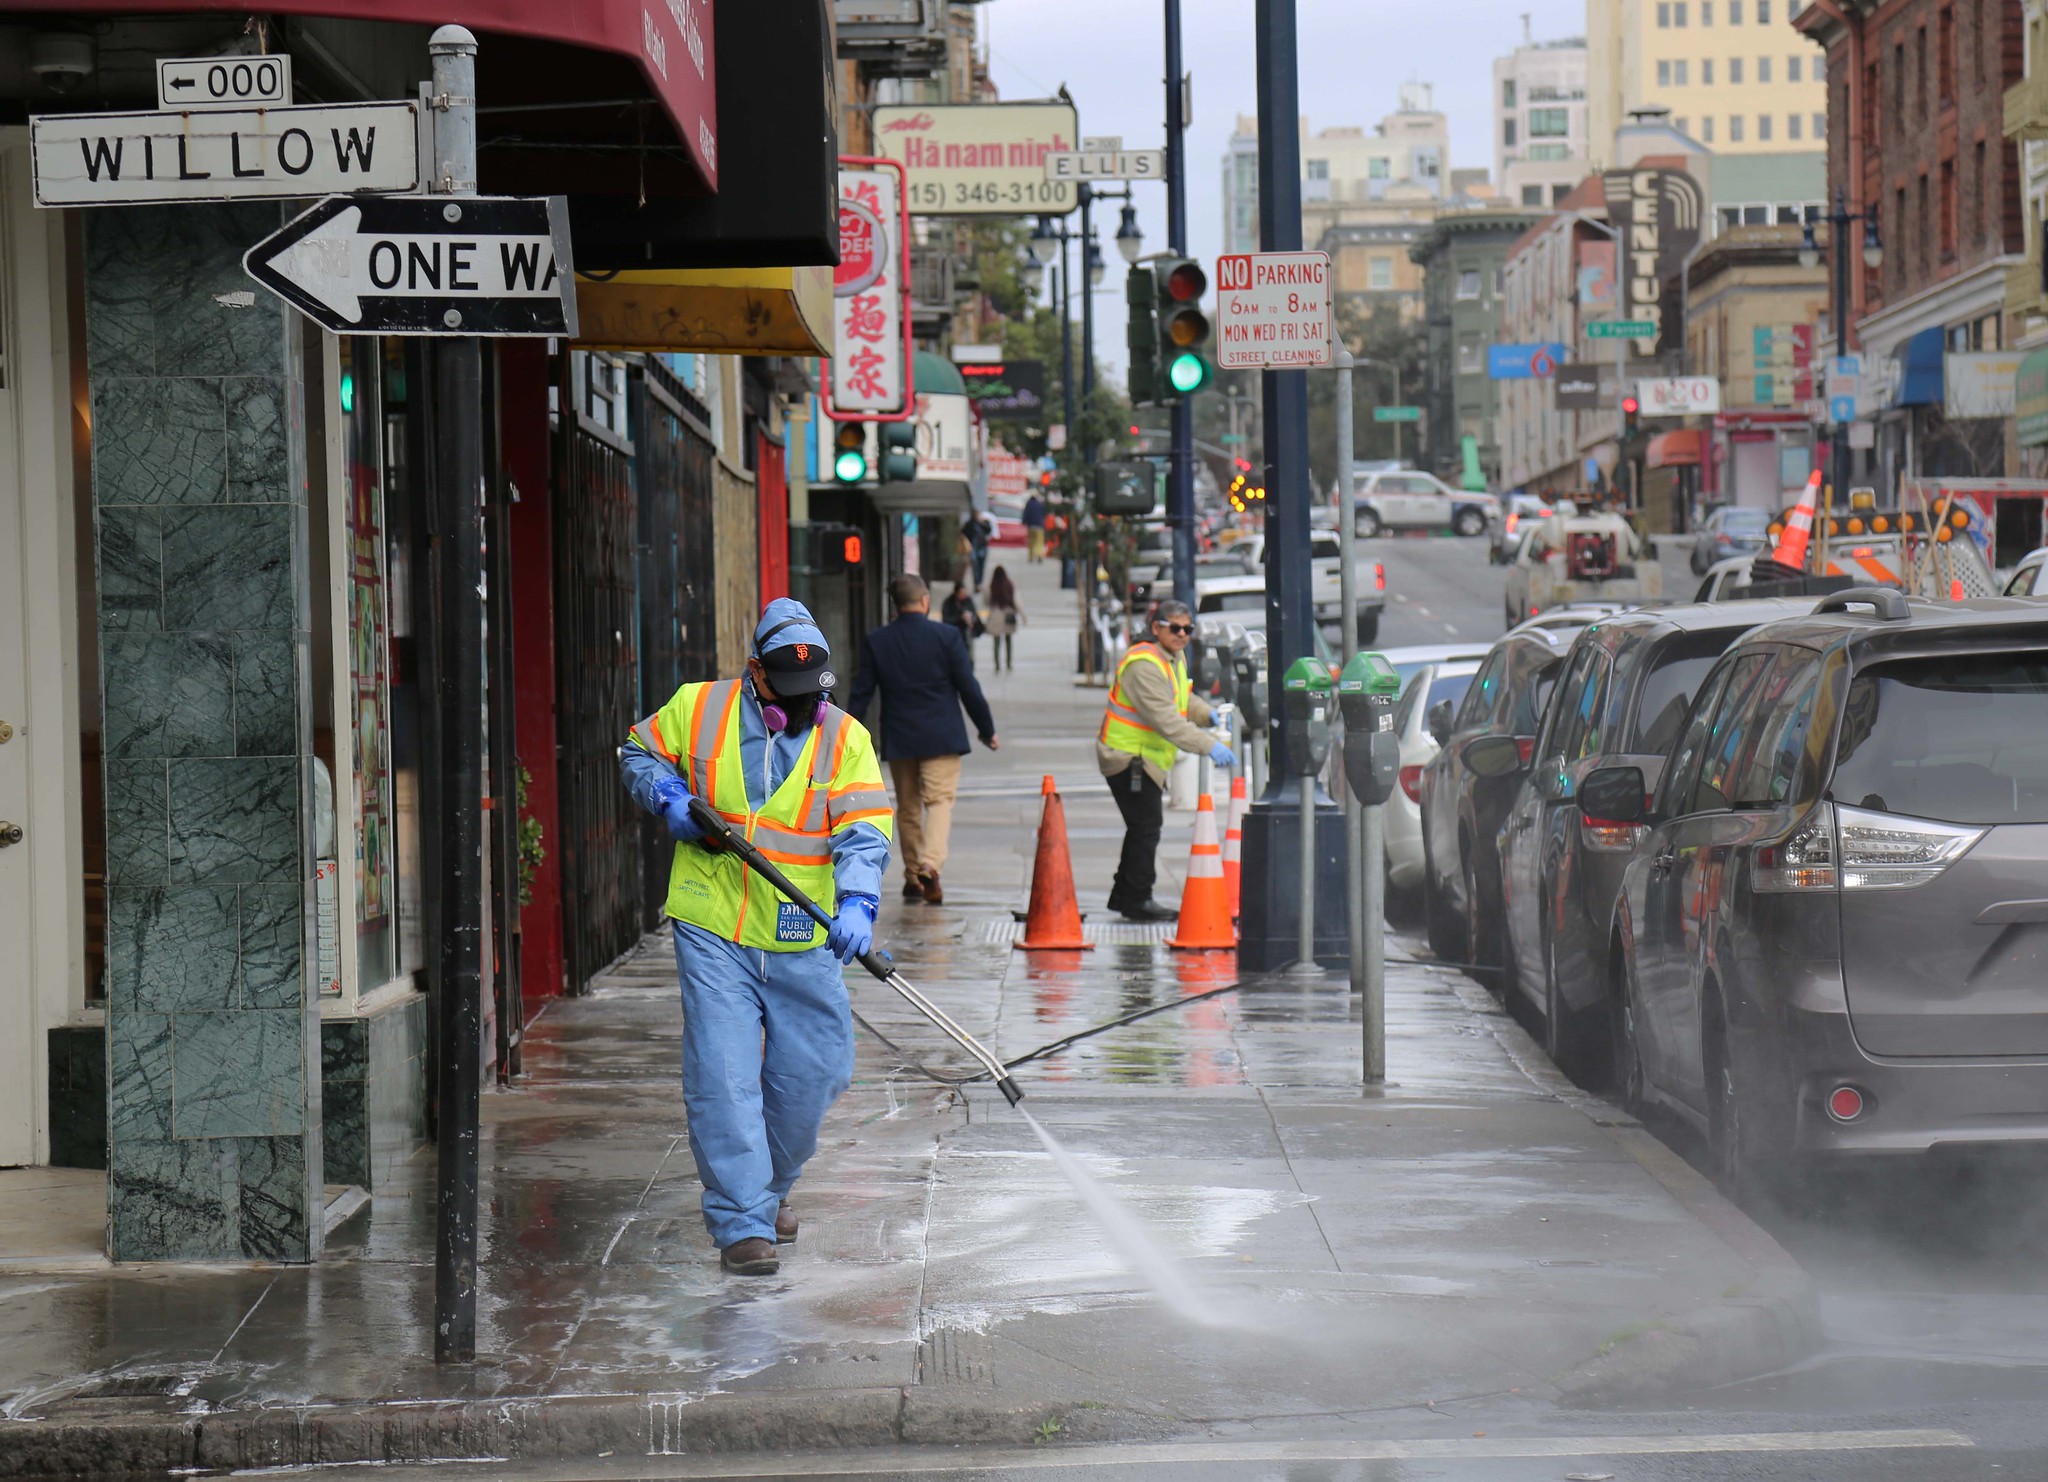 One of our crew members sprays a dirty street in the Little Saigon neighborhood